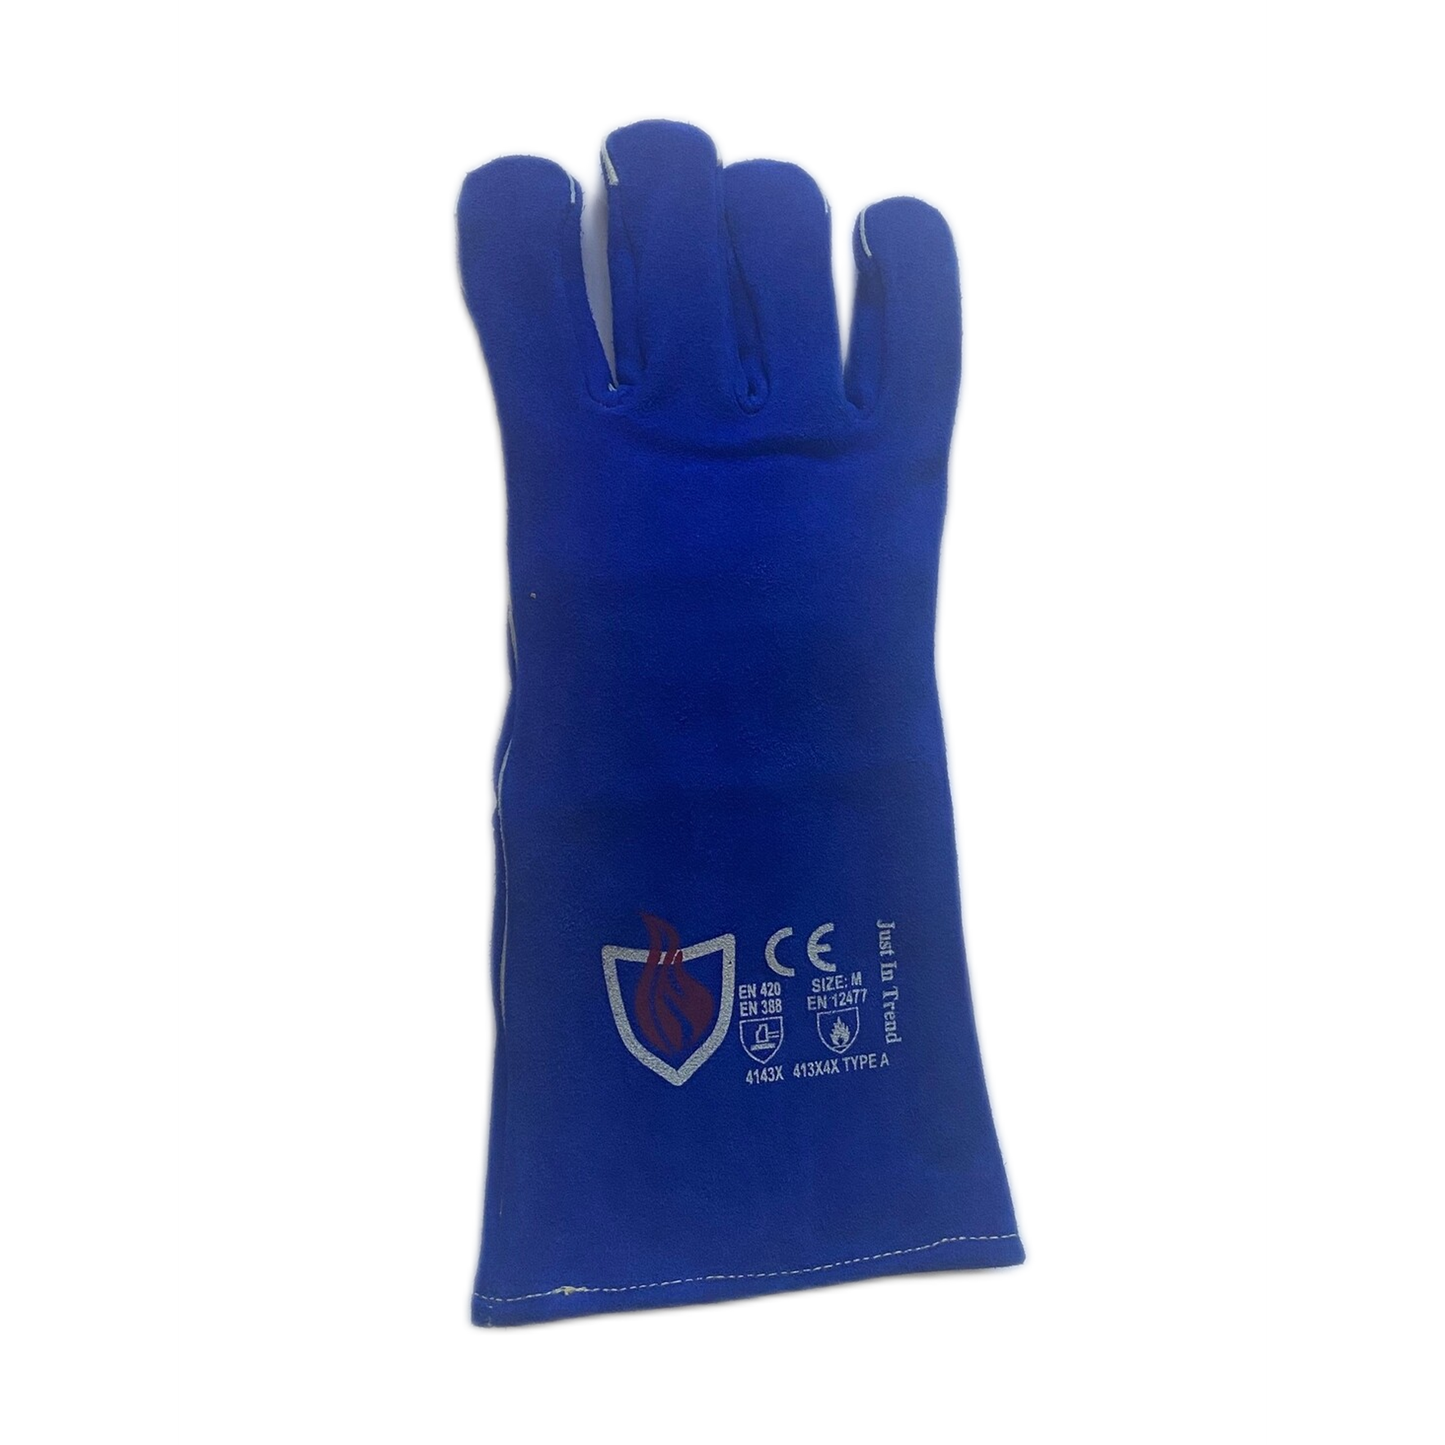 Flame Heat Resistant Leather Welding Gloves, Royal Blue